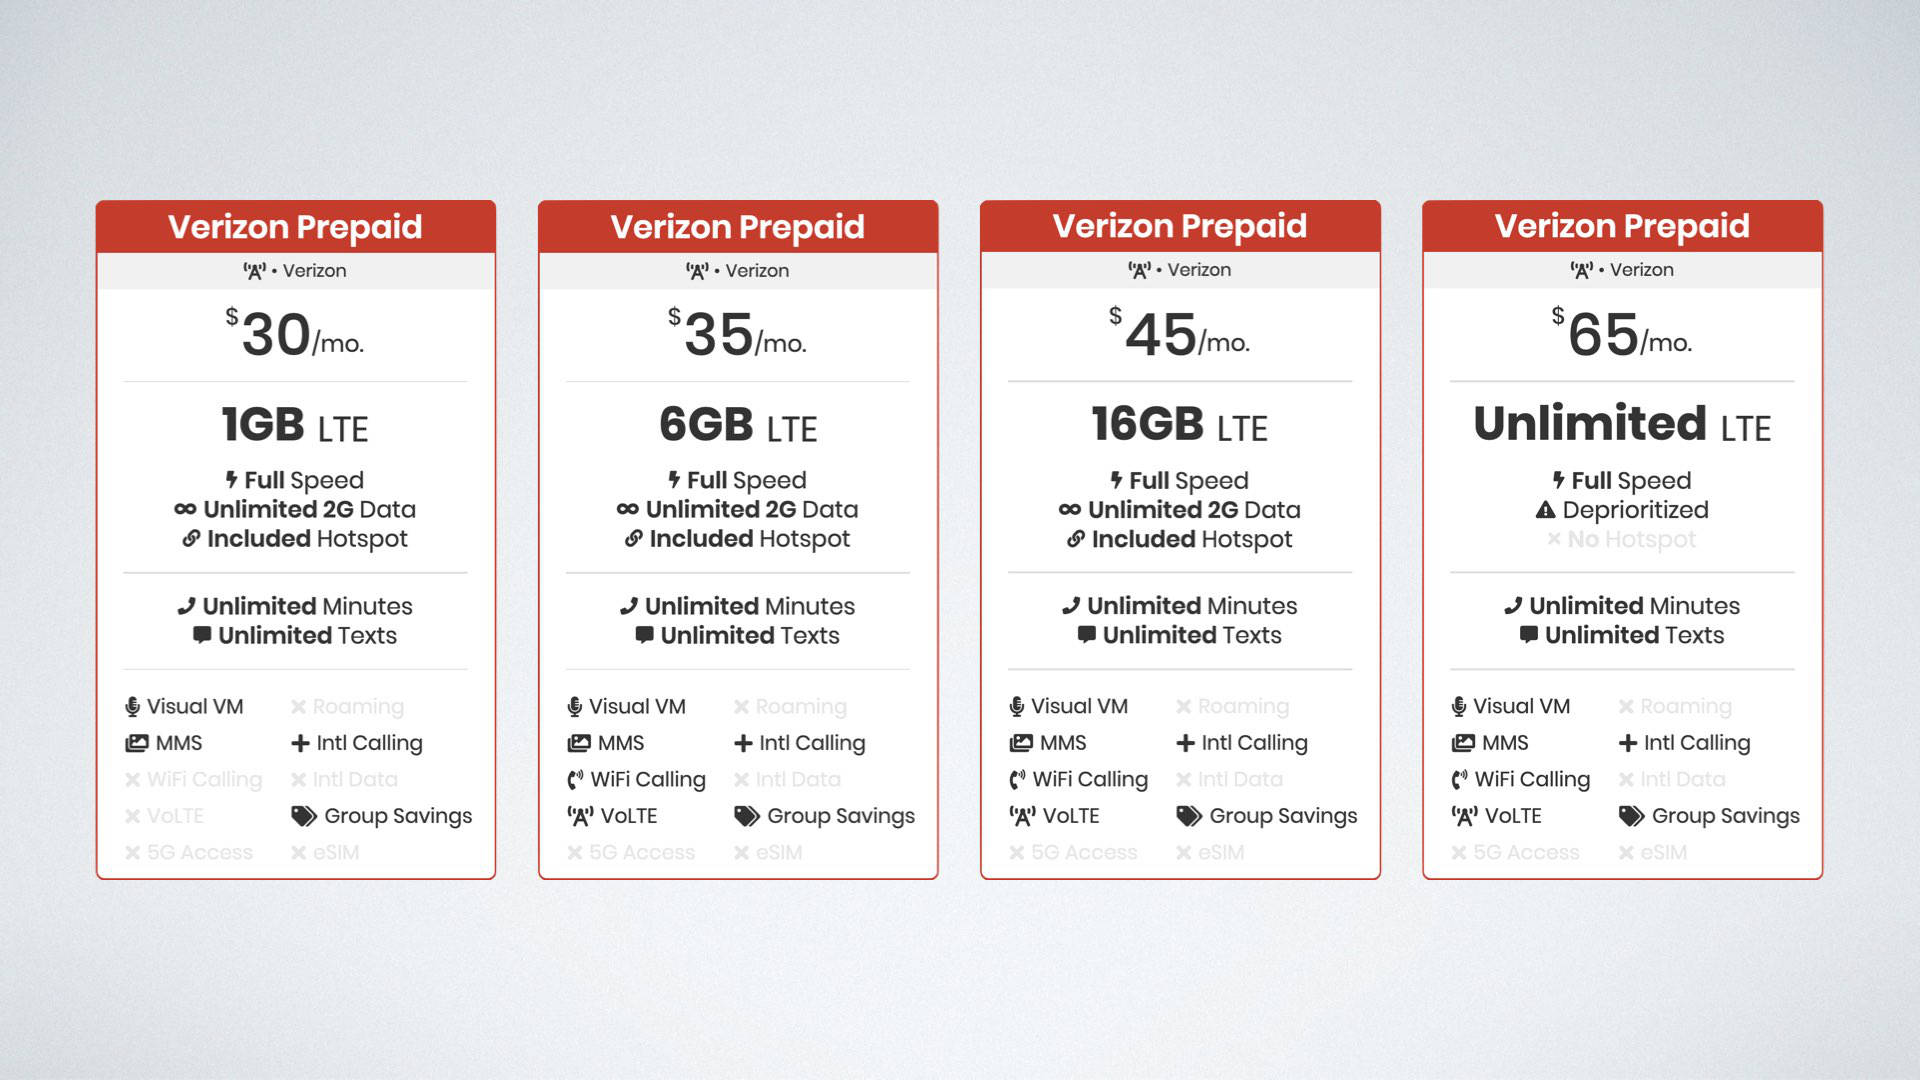 verizon-offers-more-data-on-prepaid-plans-than-before